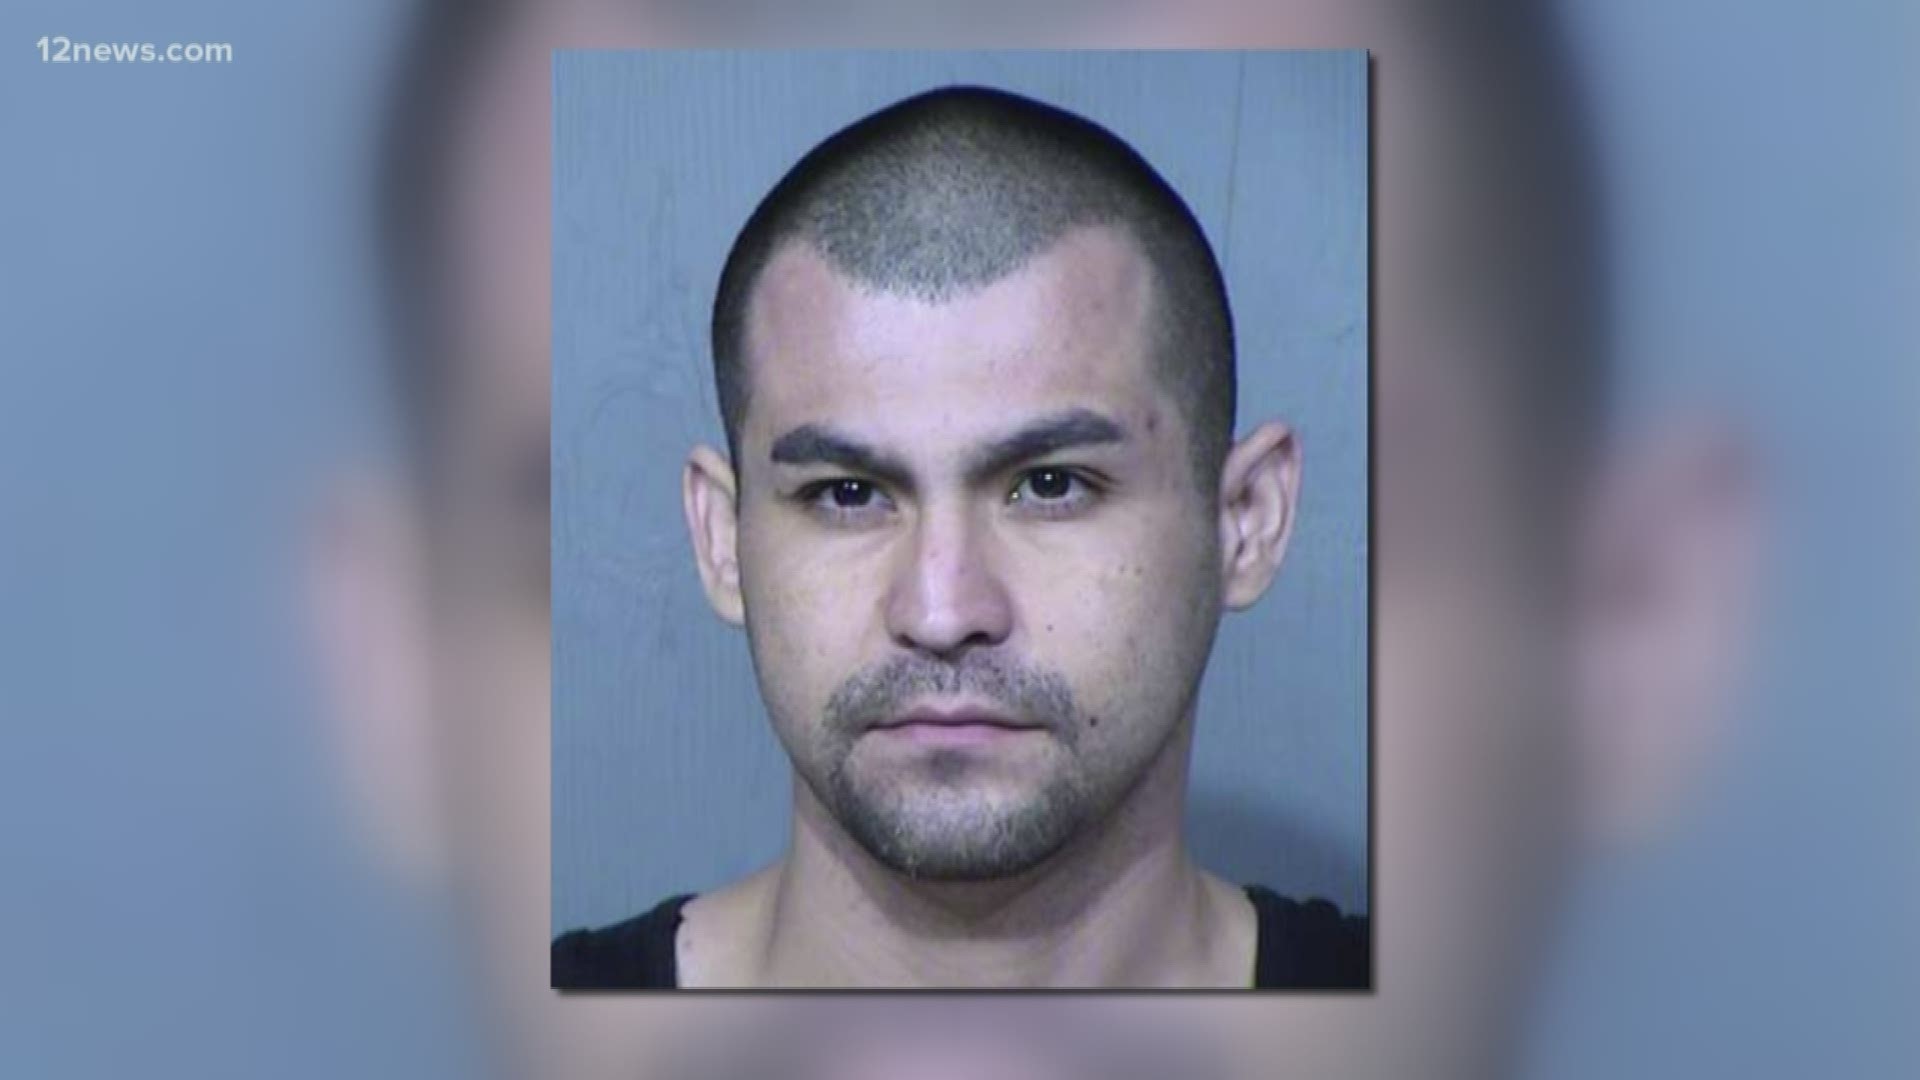 Jaime Lopez arrested after being found unconscious after overdosing on what police described as a pain pill. Lopez's son was in the car at the time, police said.